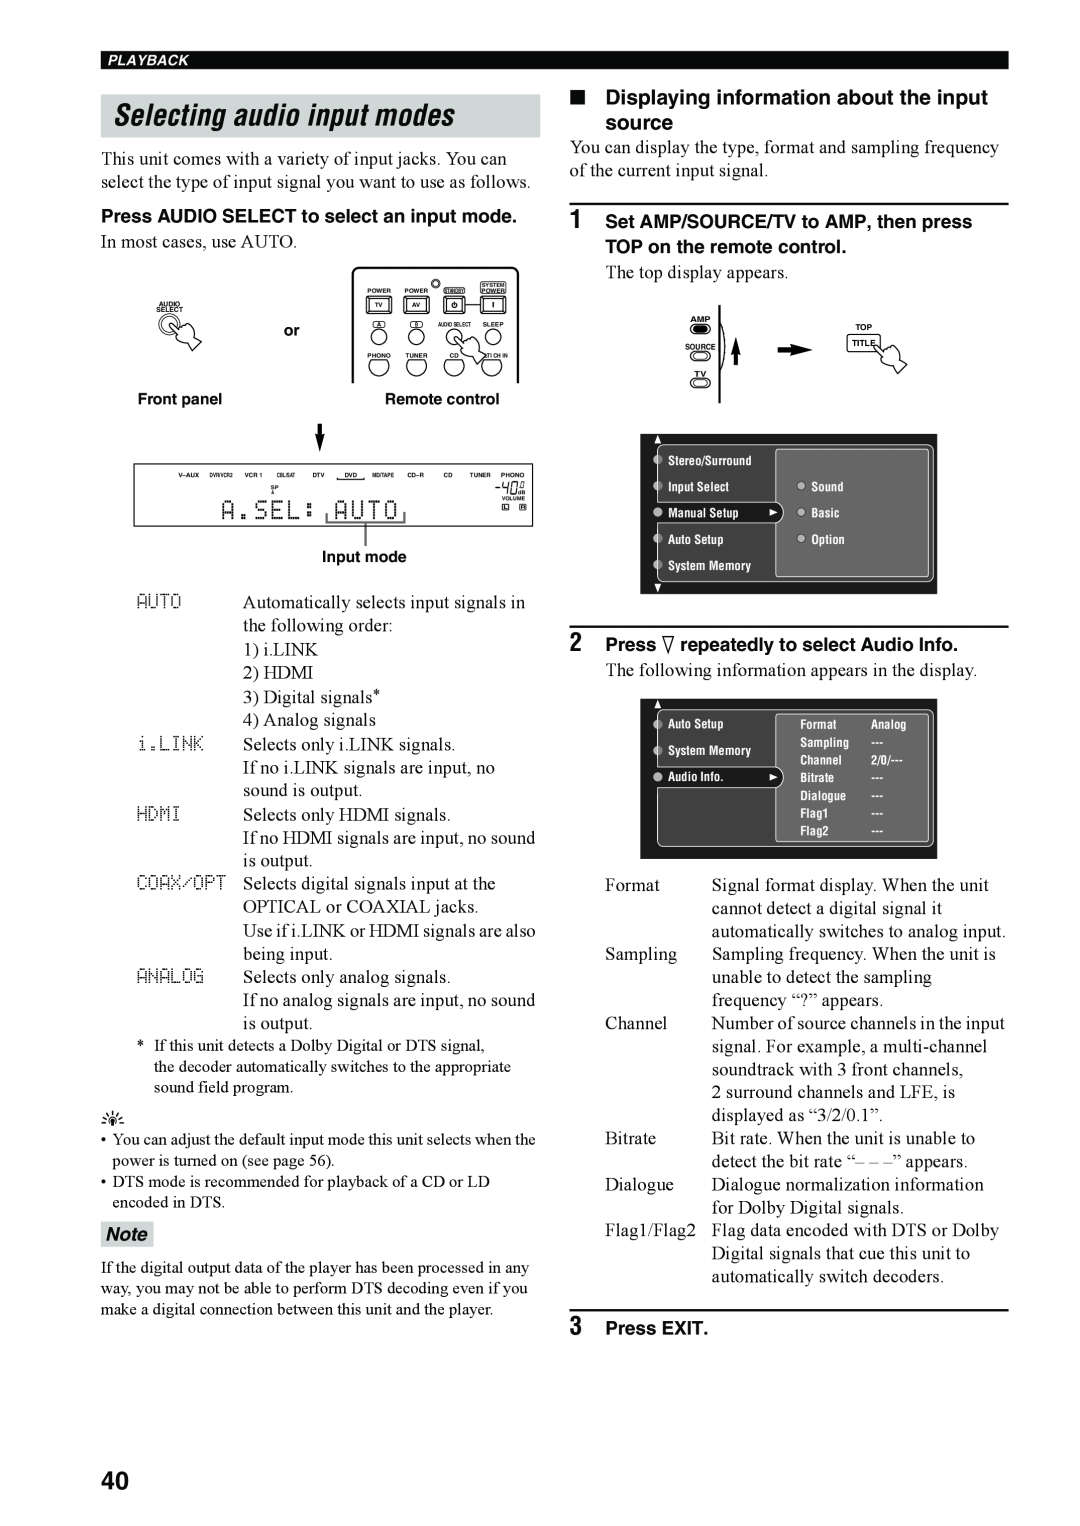 Yamaha RX-V4600 Selecting audio input modes, Displaying information about the input source, Auto, the following order 